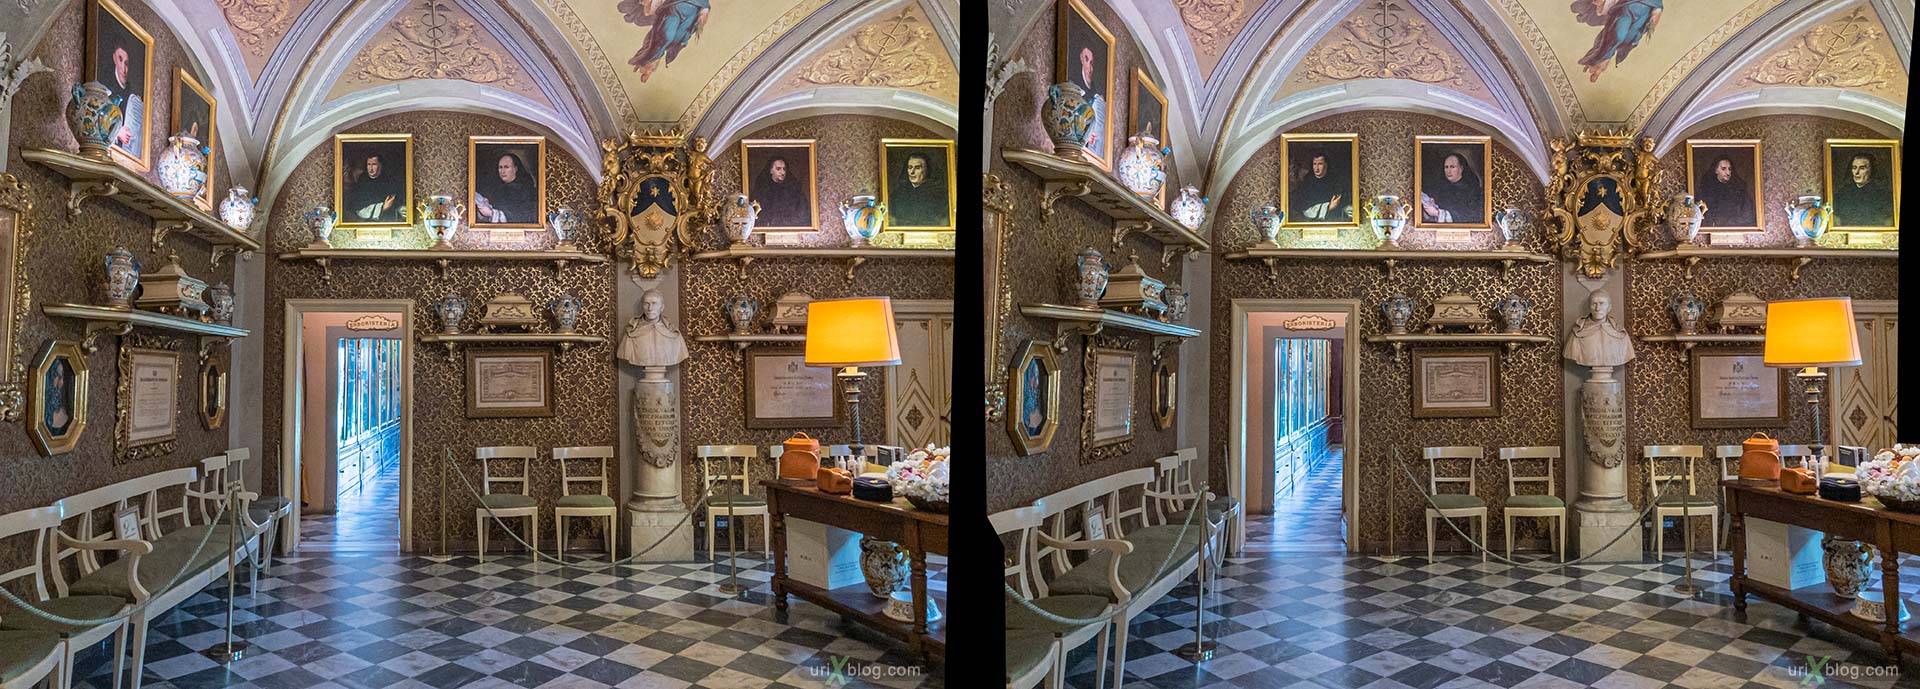 Santa Maria Novella, pharmacy, Florence, Firenze, Italy, 3D, stereo pair, cross-eyed, crossview, cross view stereo pair, stereoscopic